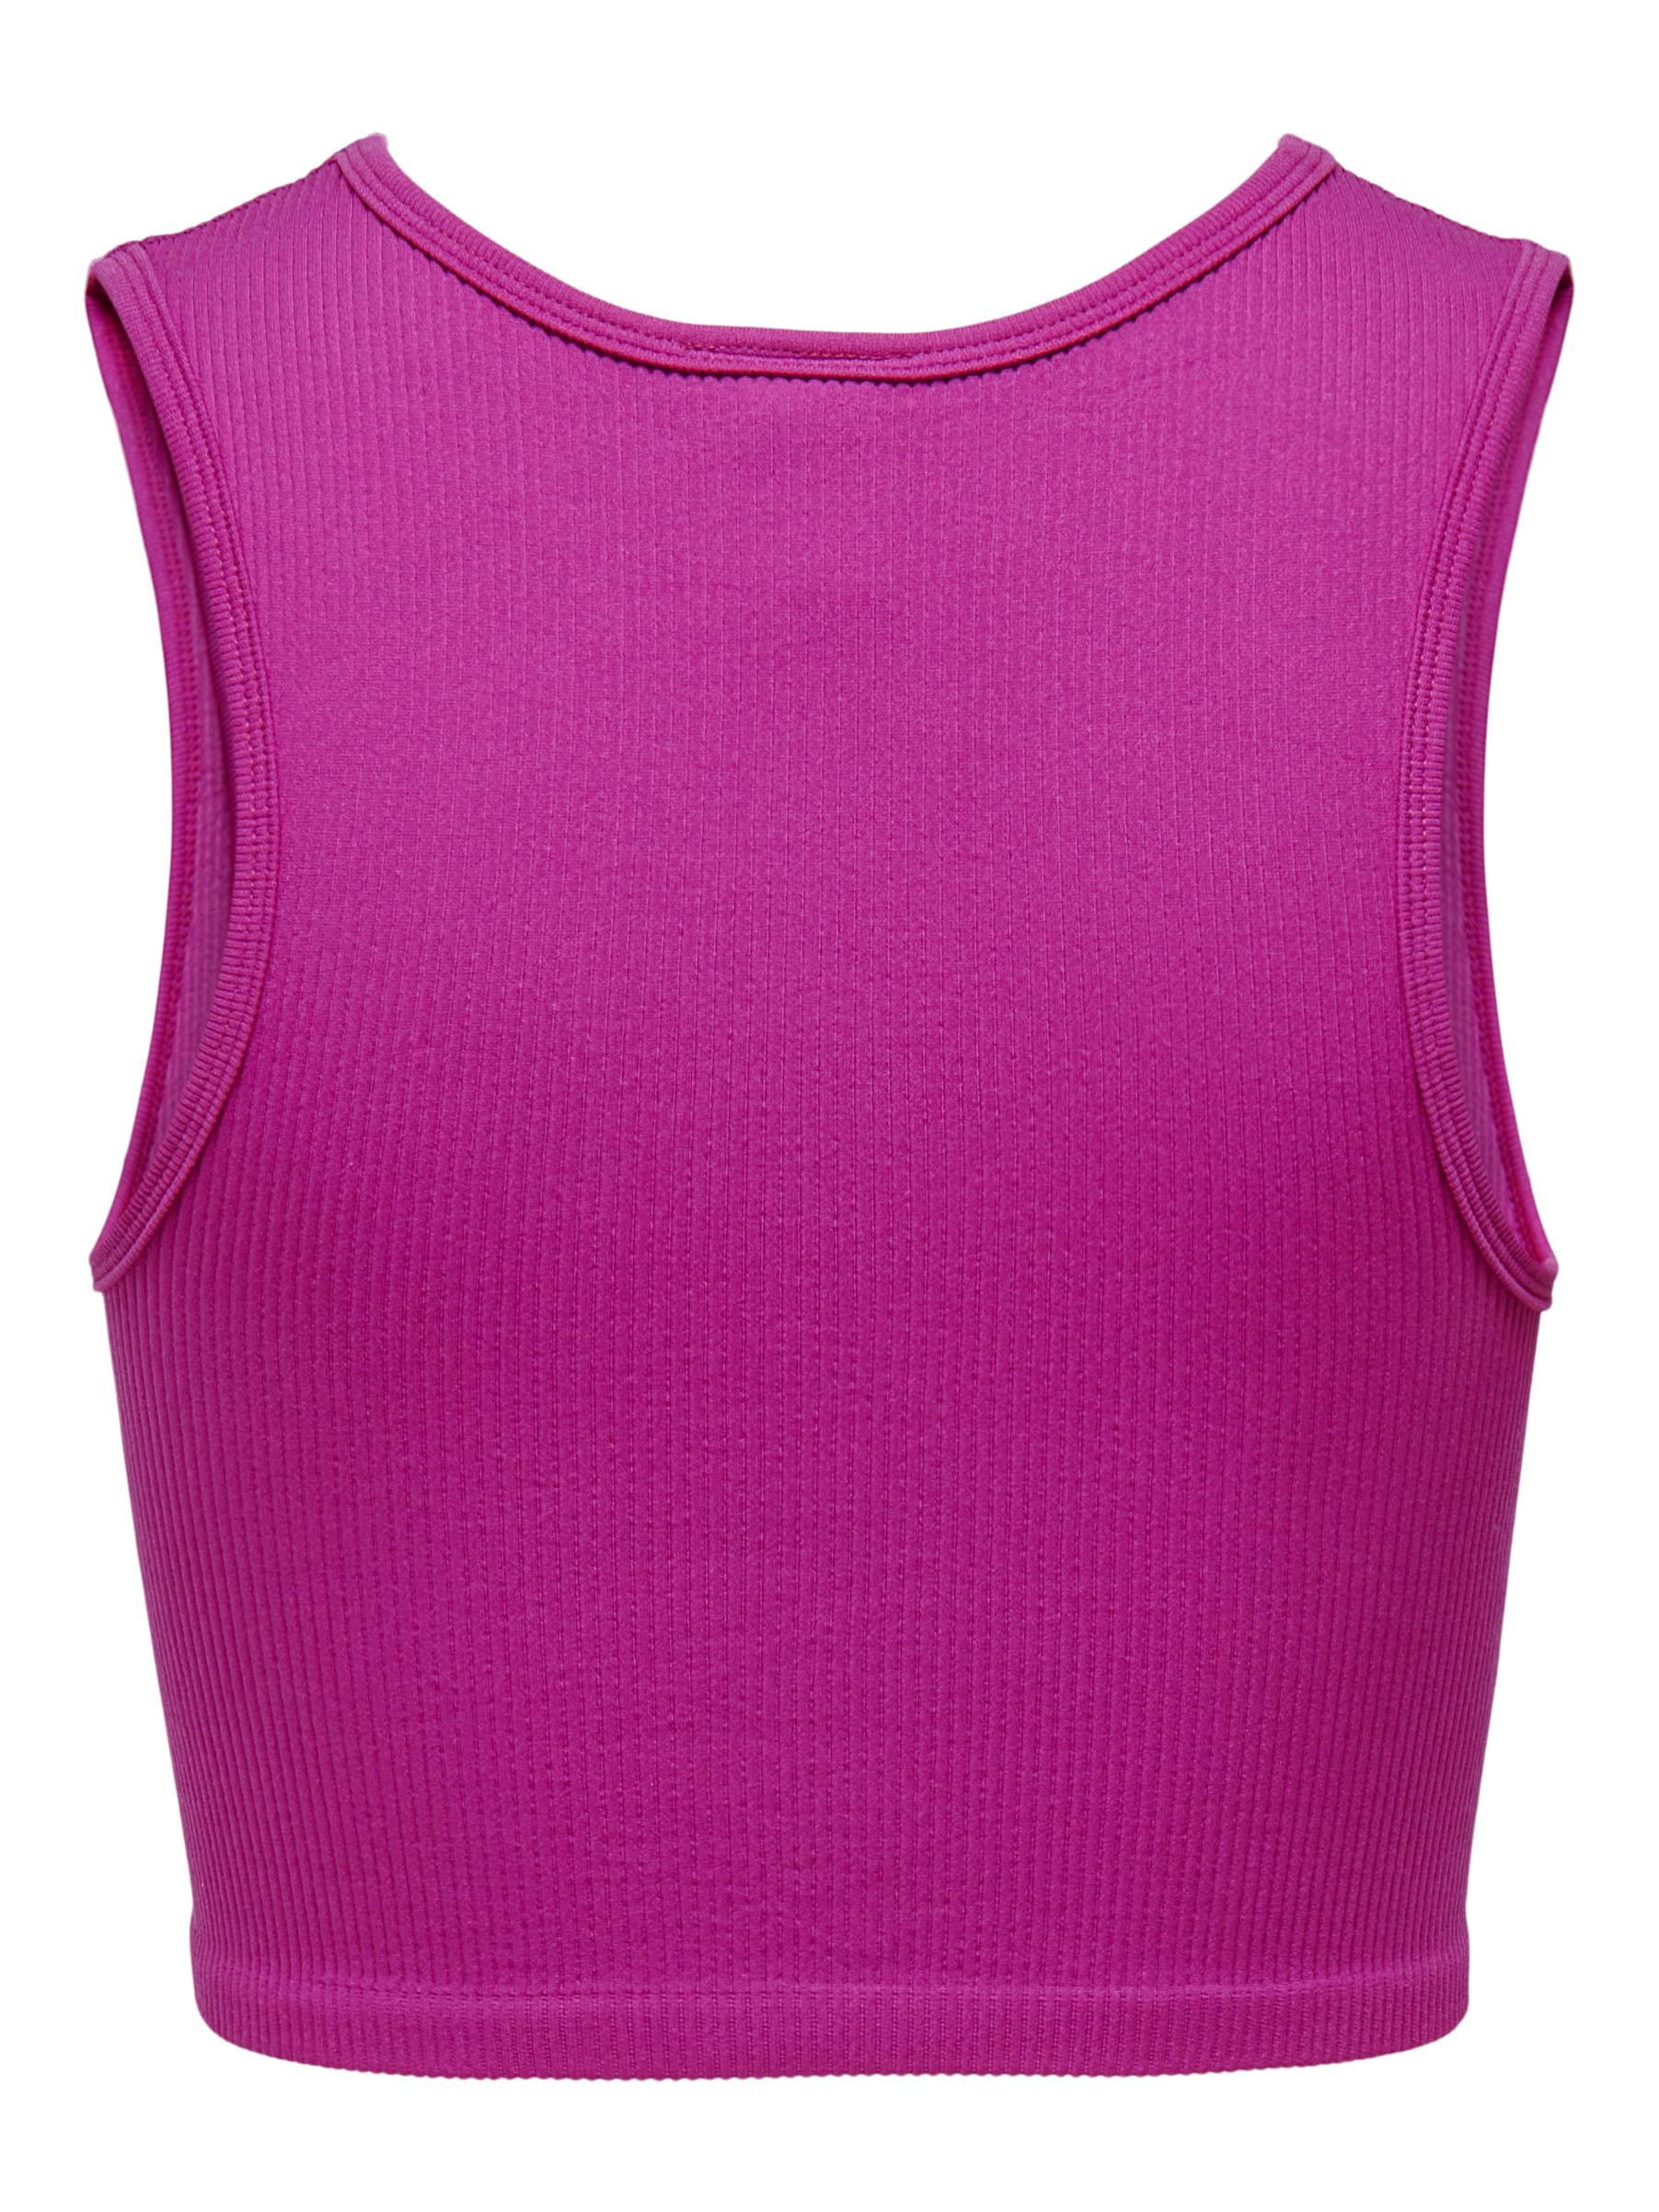 Only - Stretch-fit top, Pink Peony, large image number 1